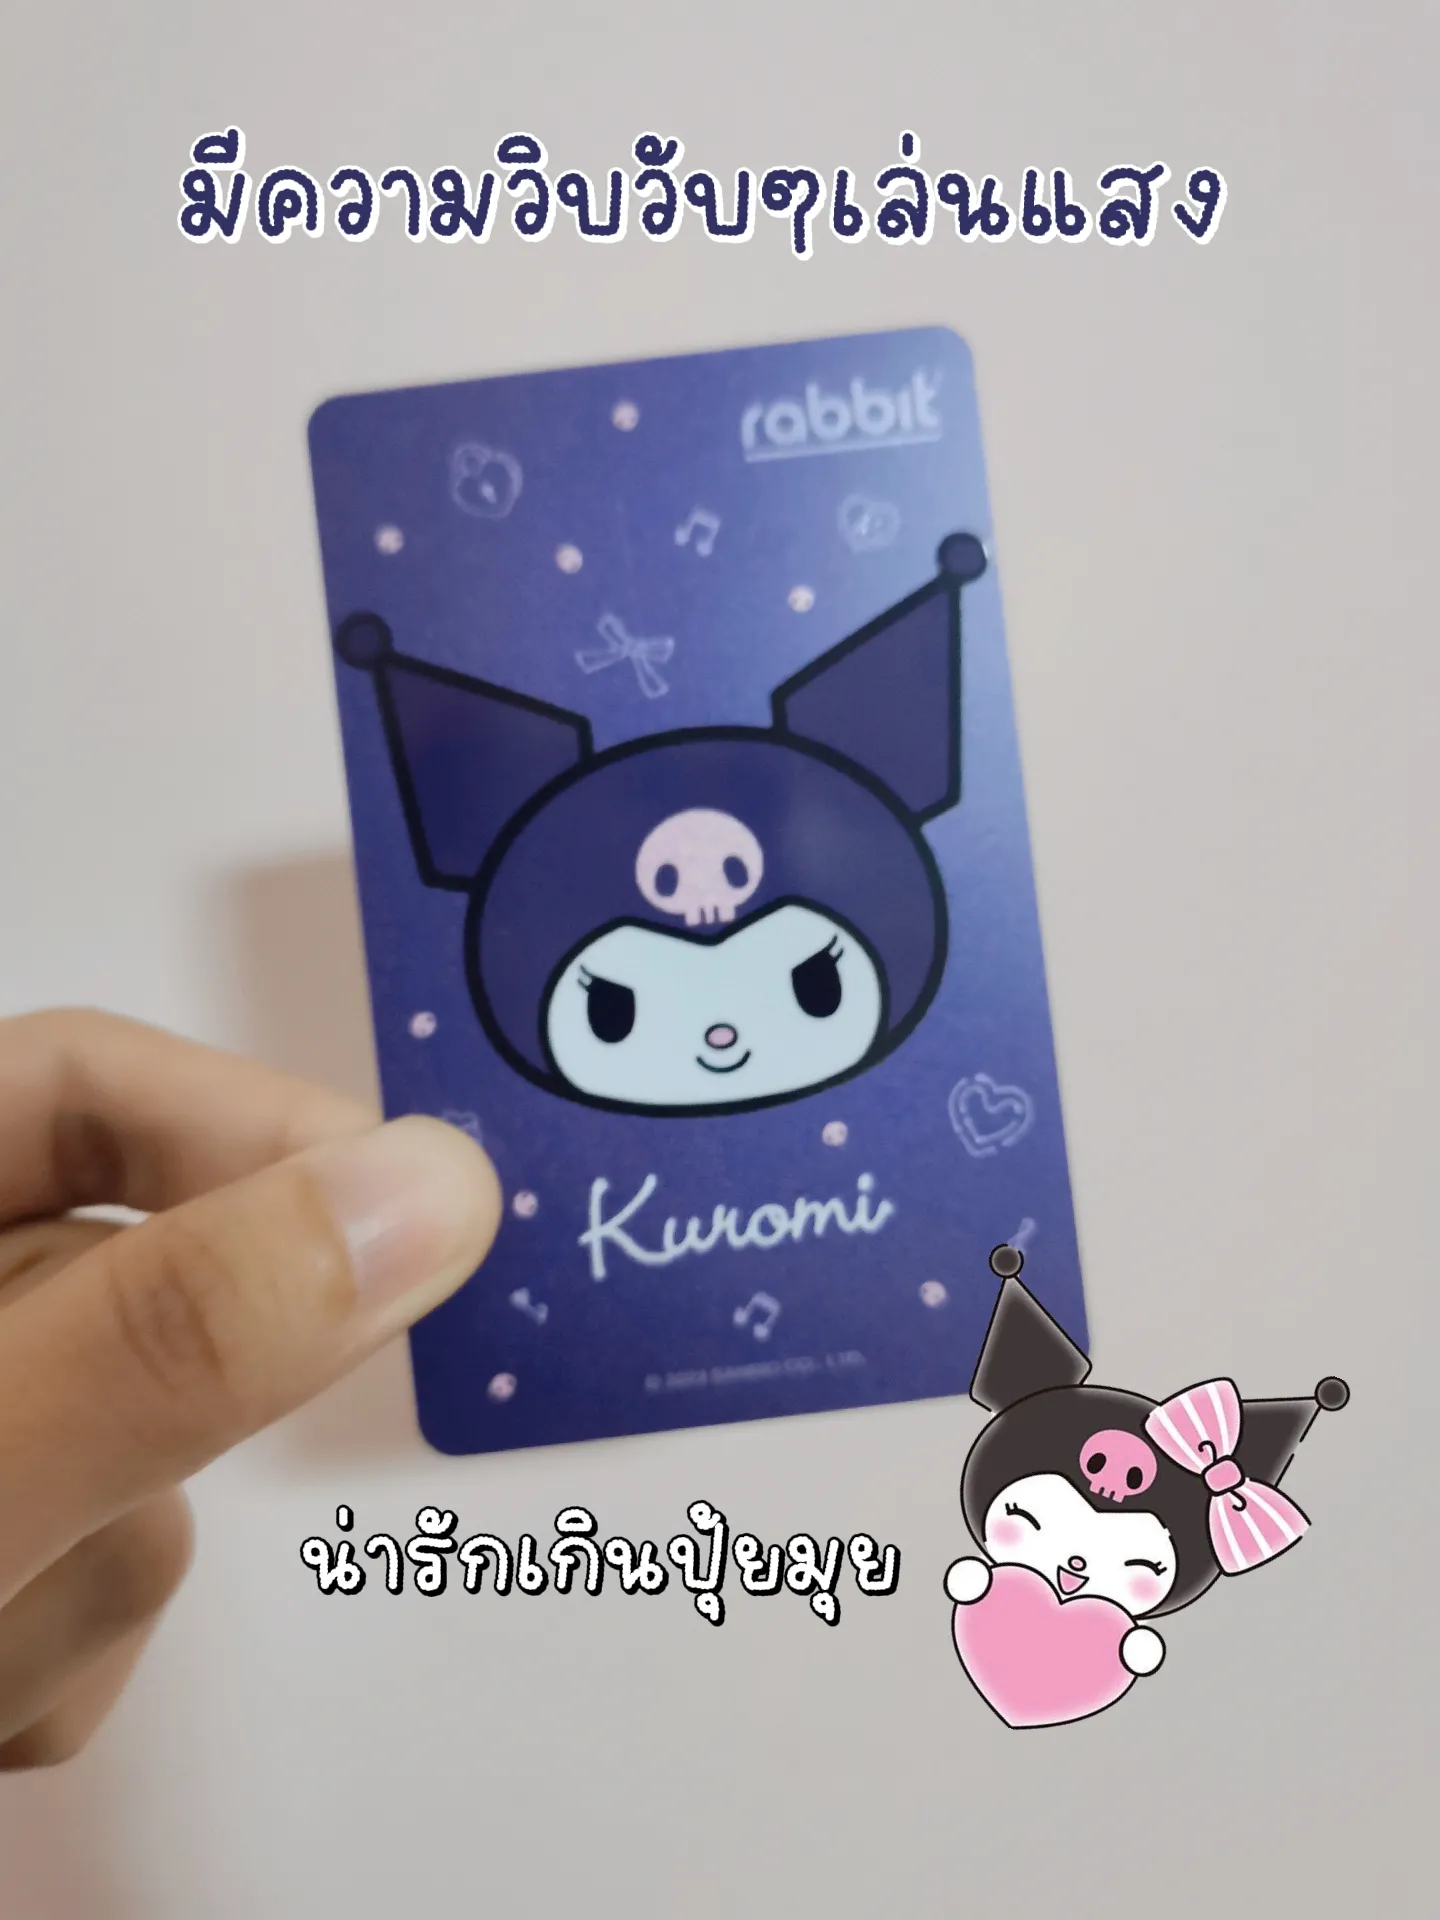 Rabbit KUROMI card 💜☠️, Gallery posted by Earnlovelike❤️